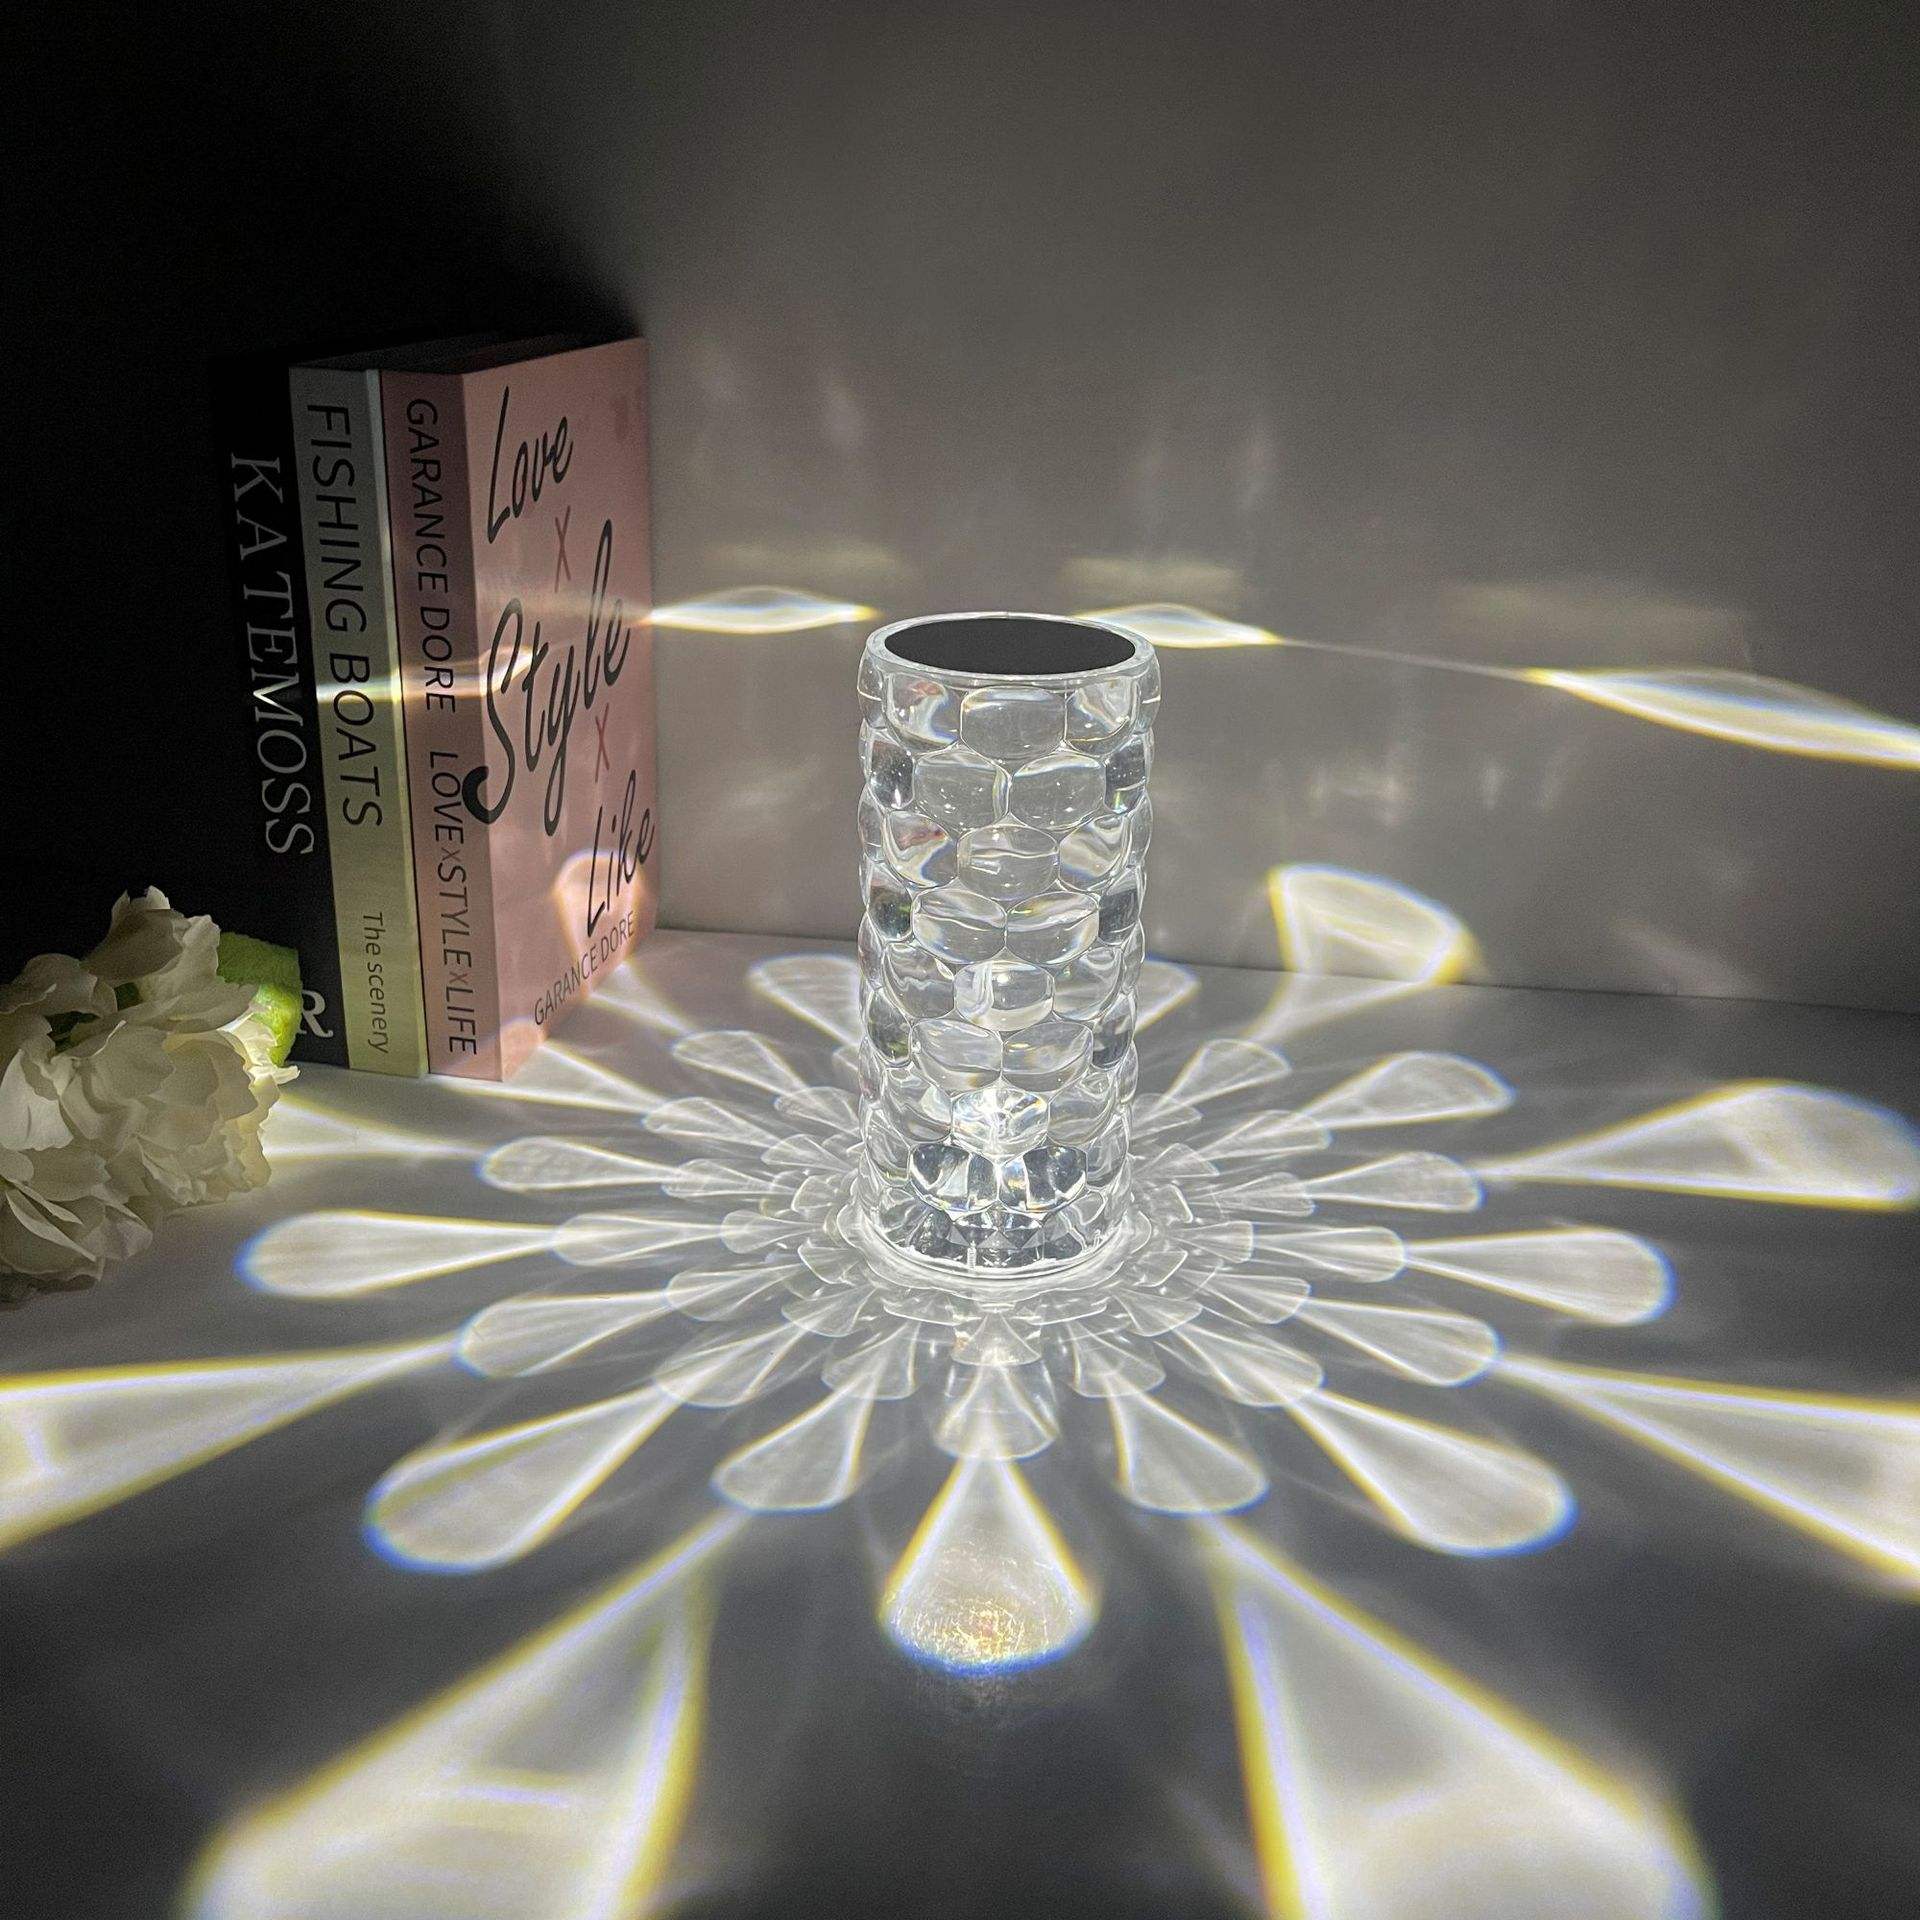 Luxury Acrylic Modern Transparent Led Touch Control Crystal Bedside Table Lamp Night Light Rechargeable Romantic Dinner Amazon